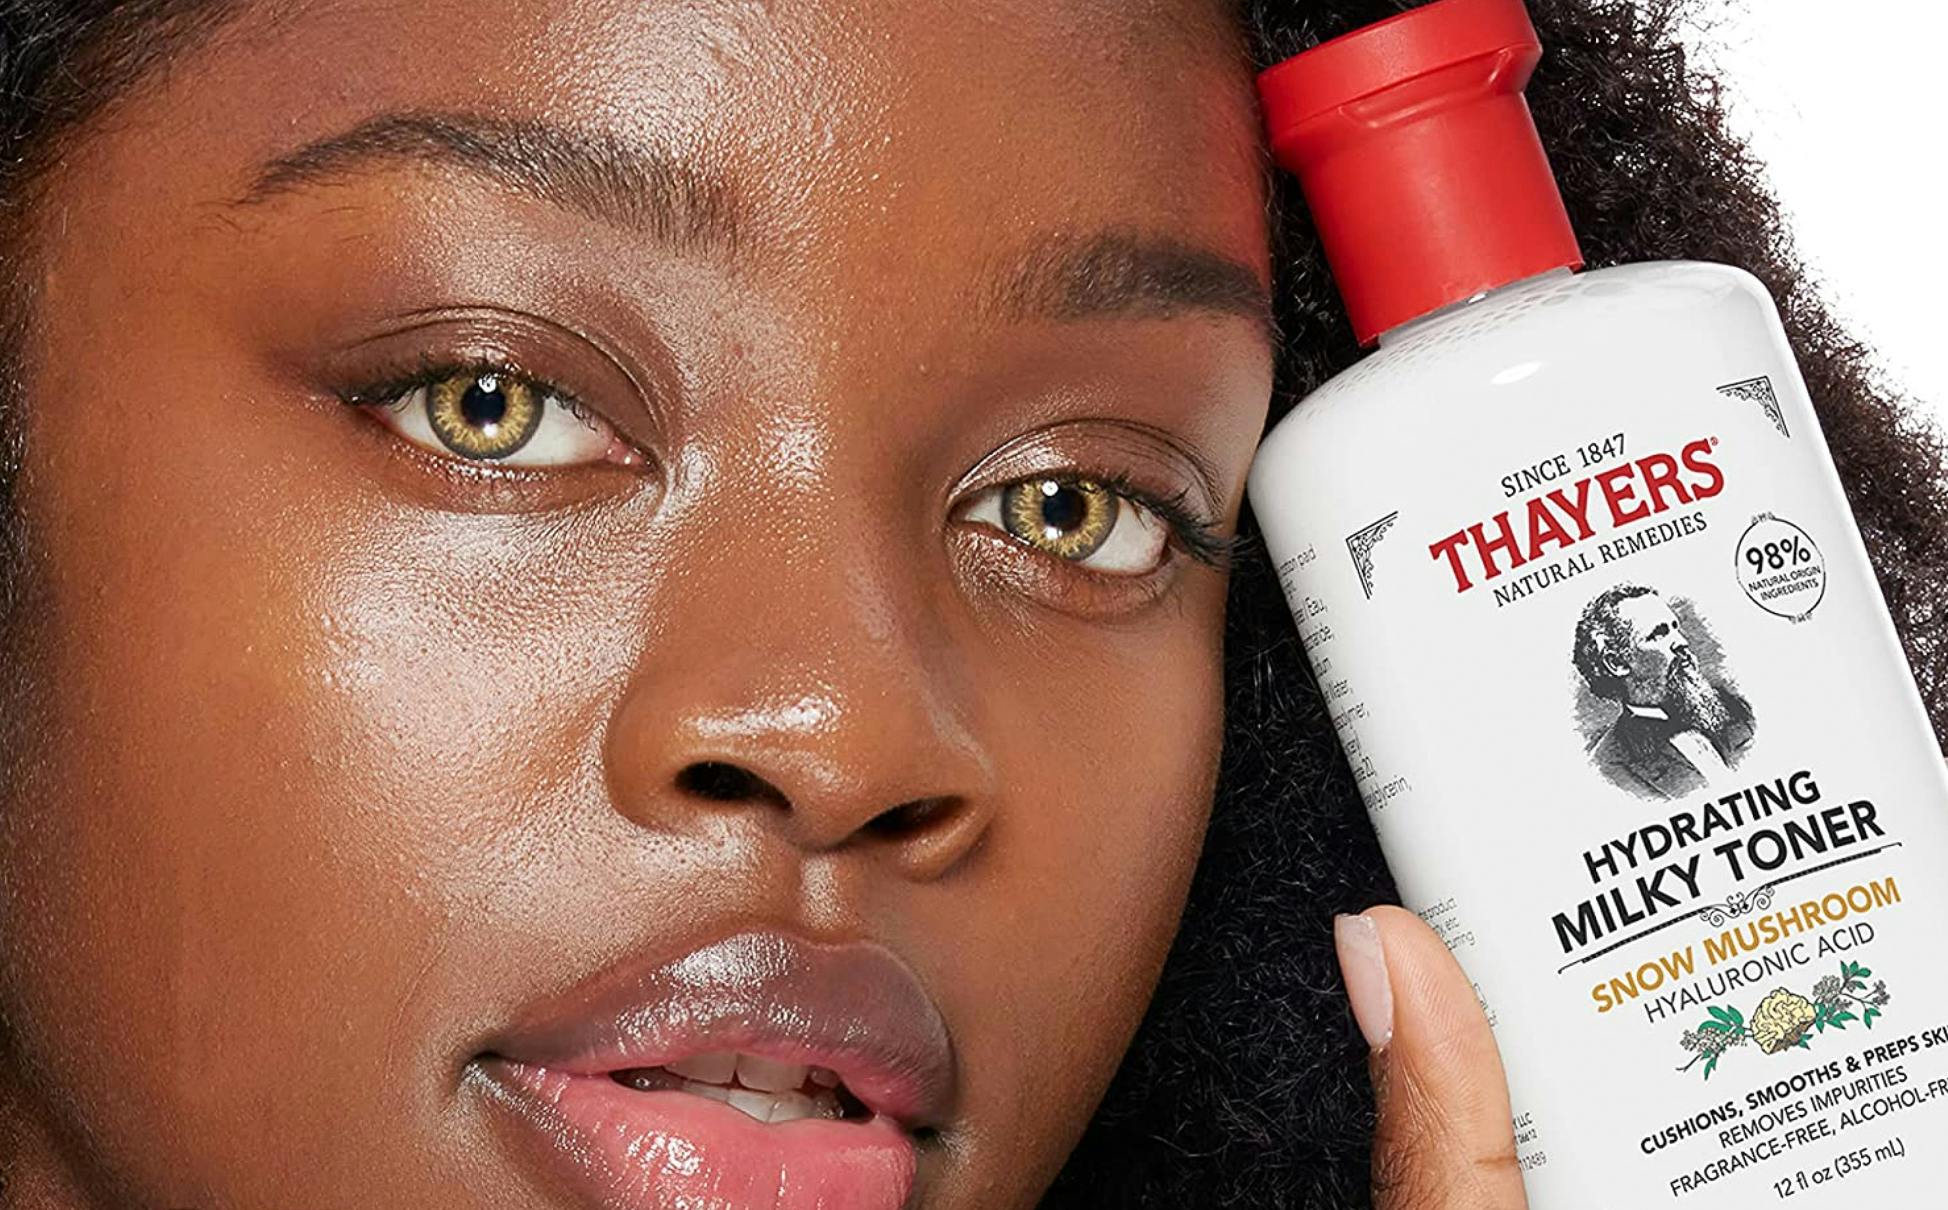 woman holding a bottle of thayers milk toner near her face